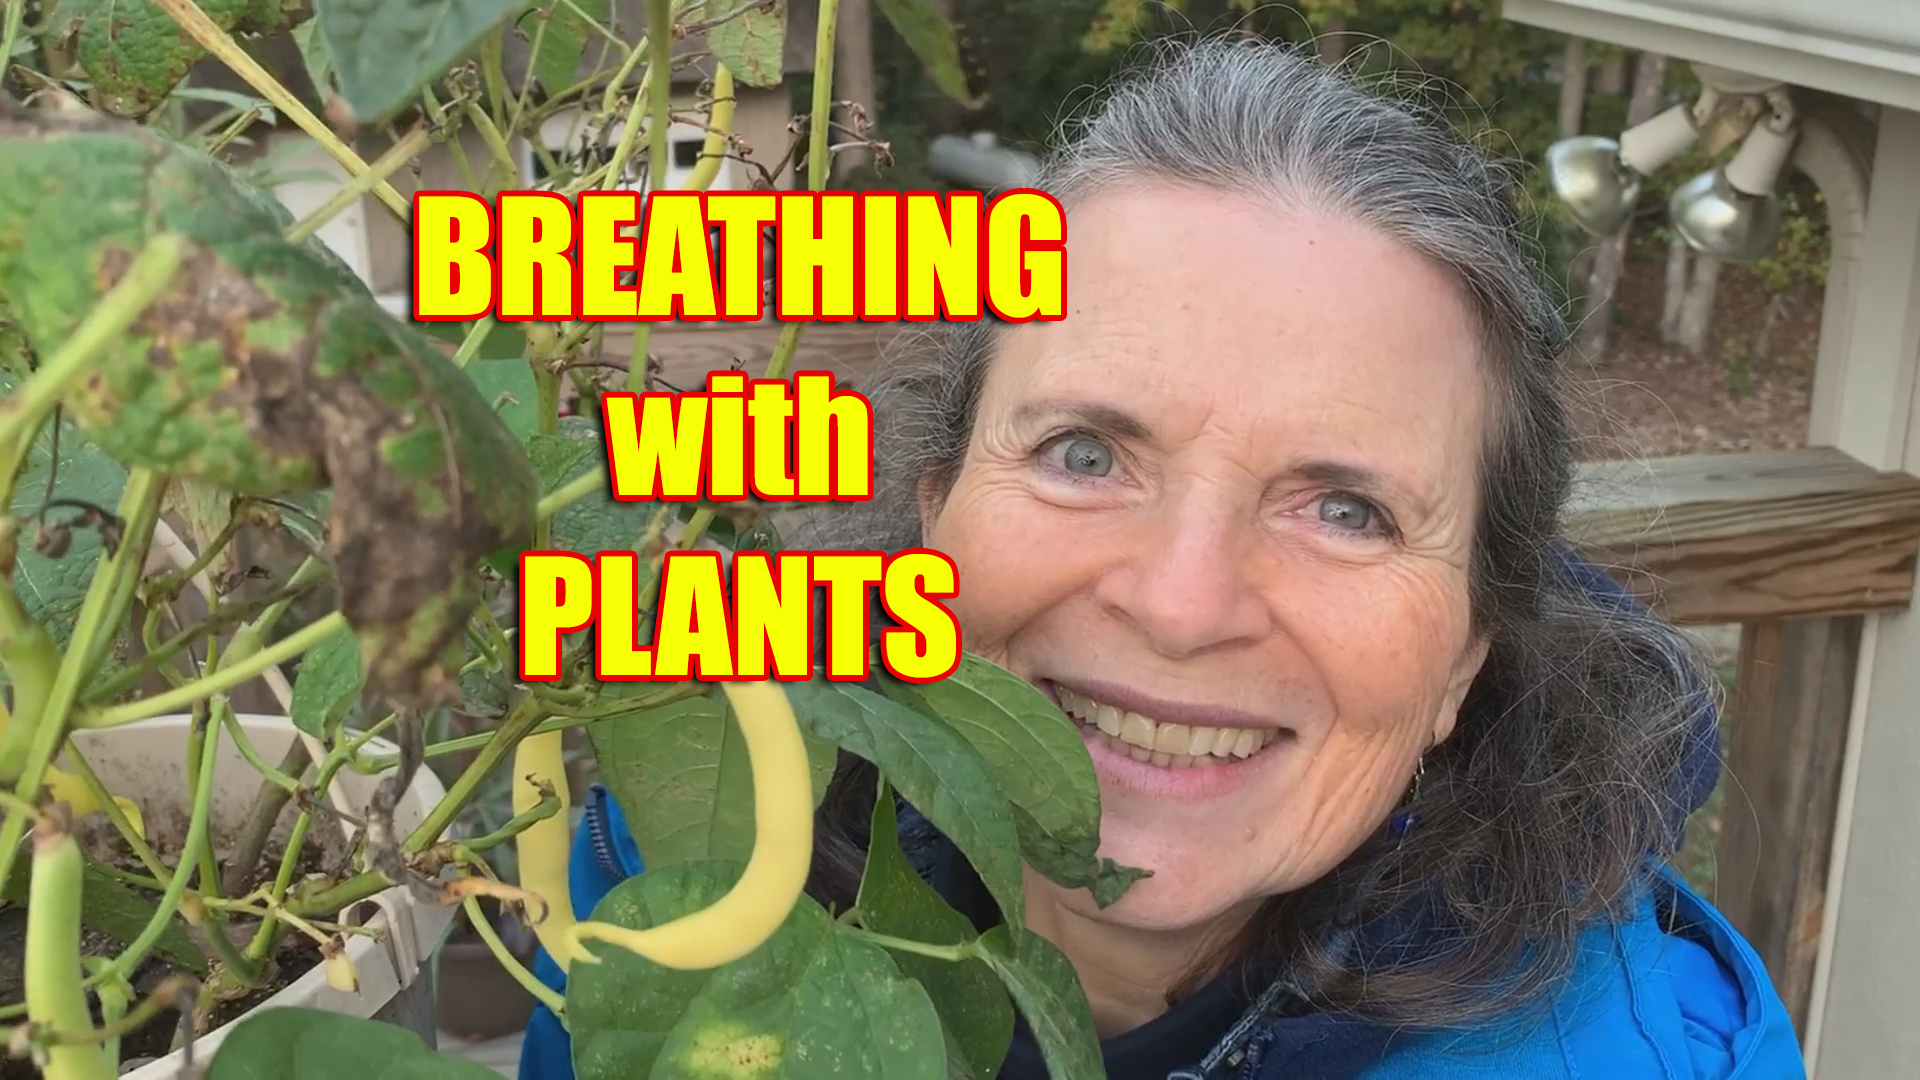 we breathe in what green plants breathe out